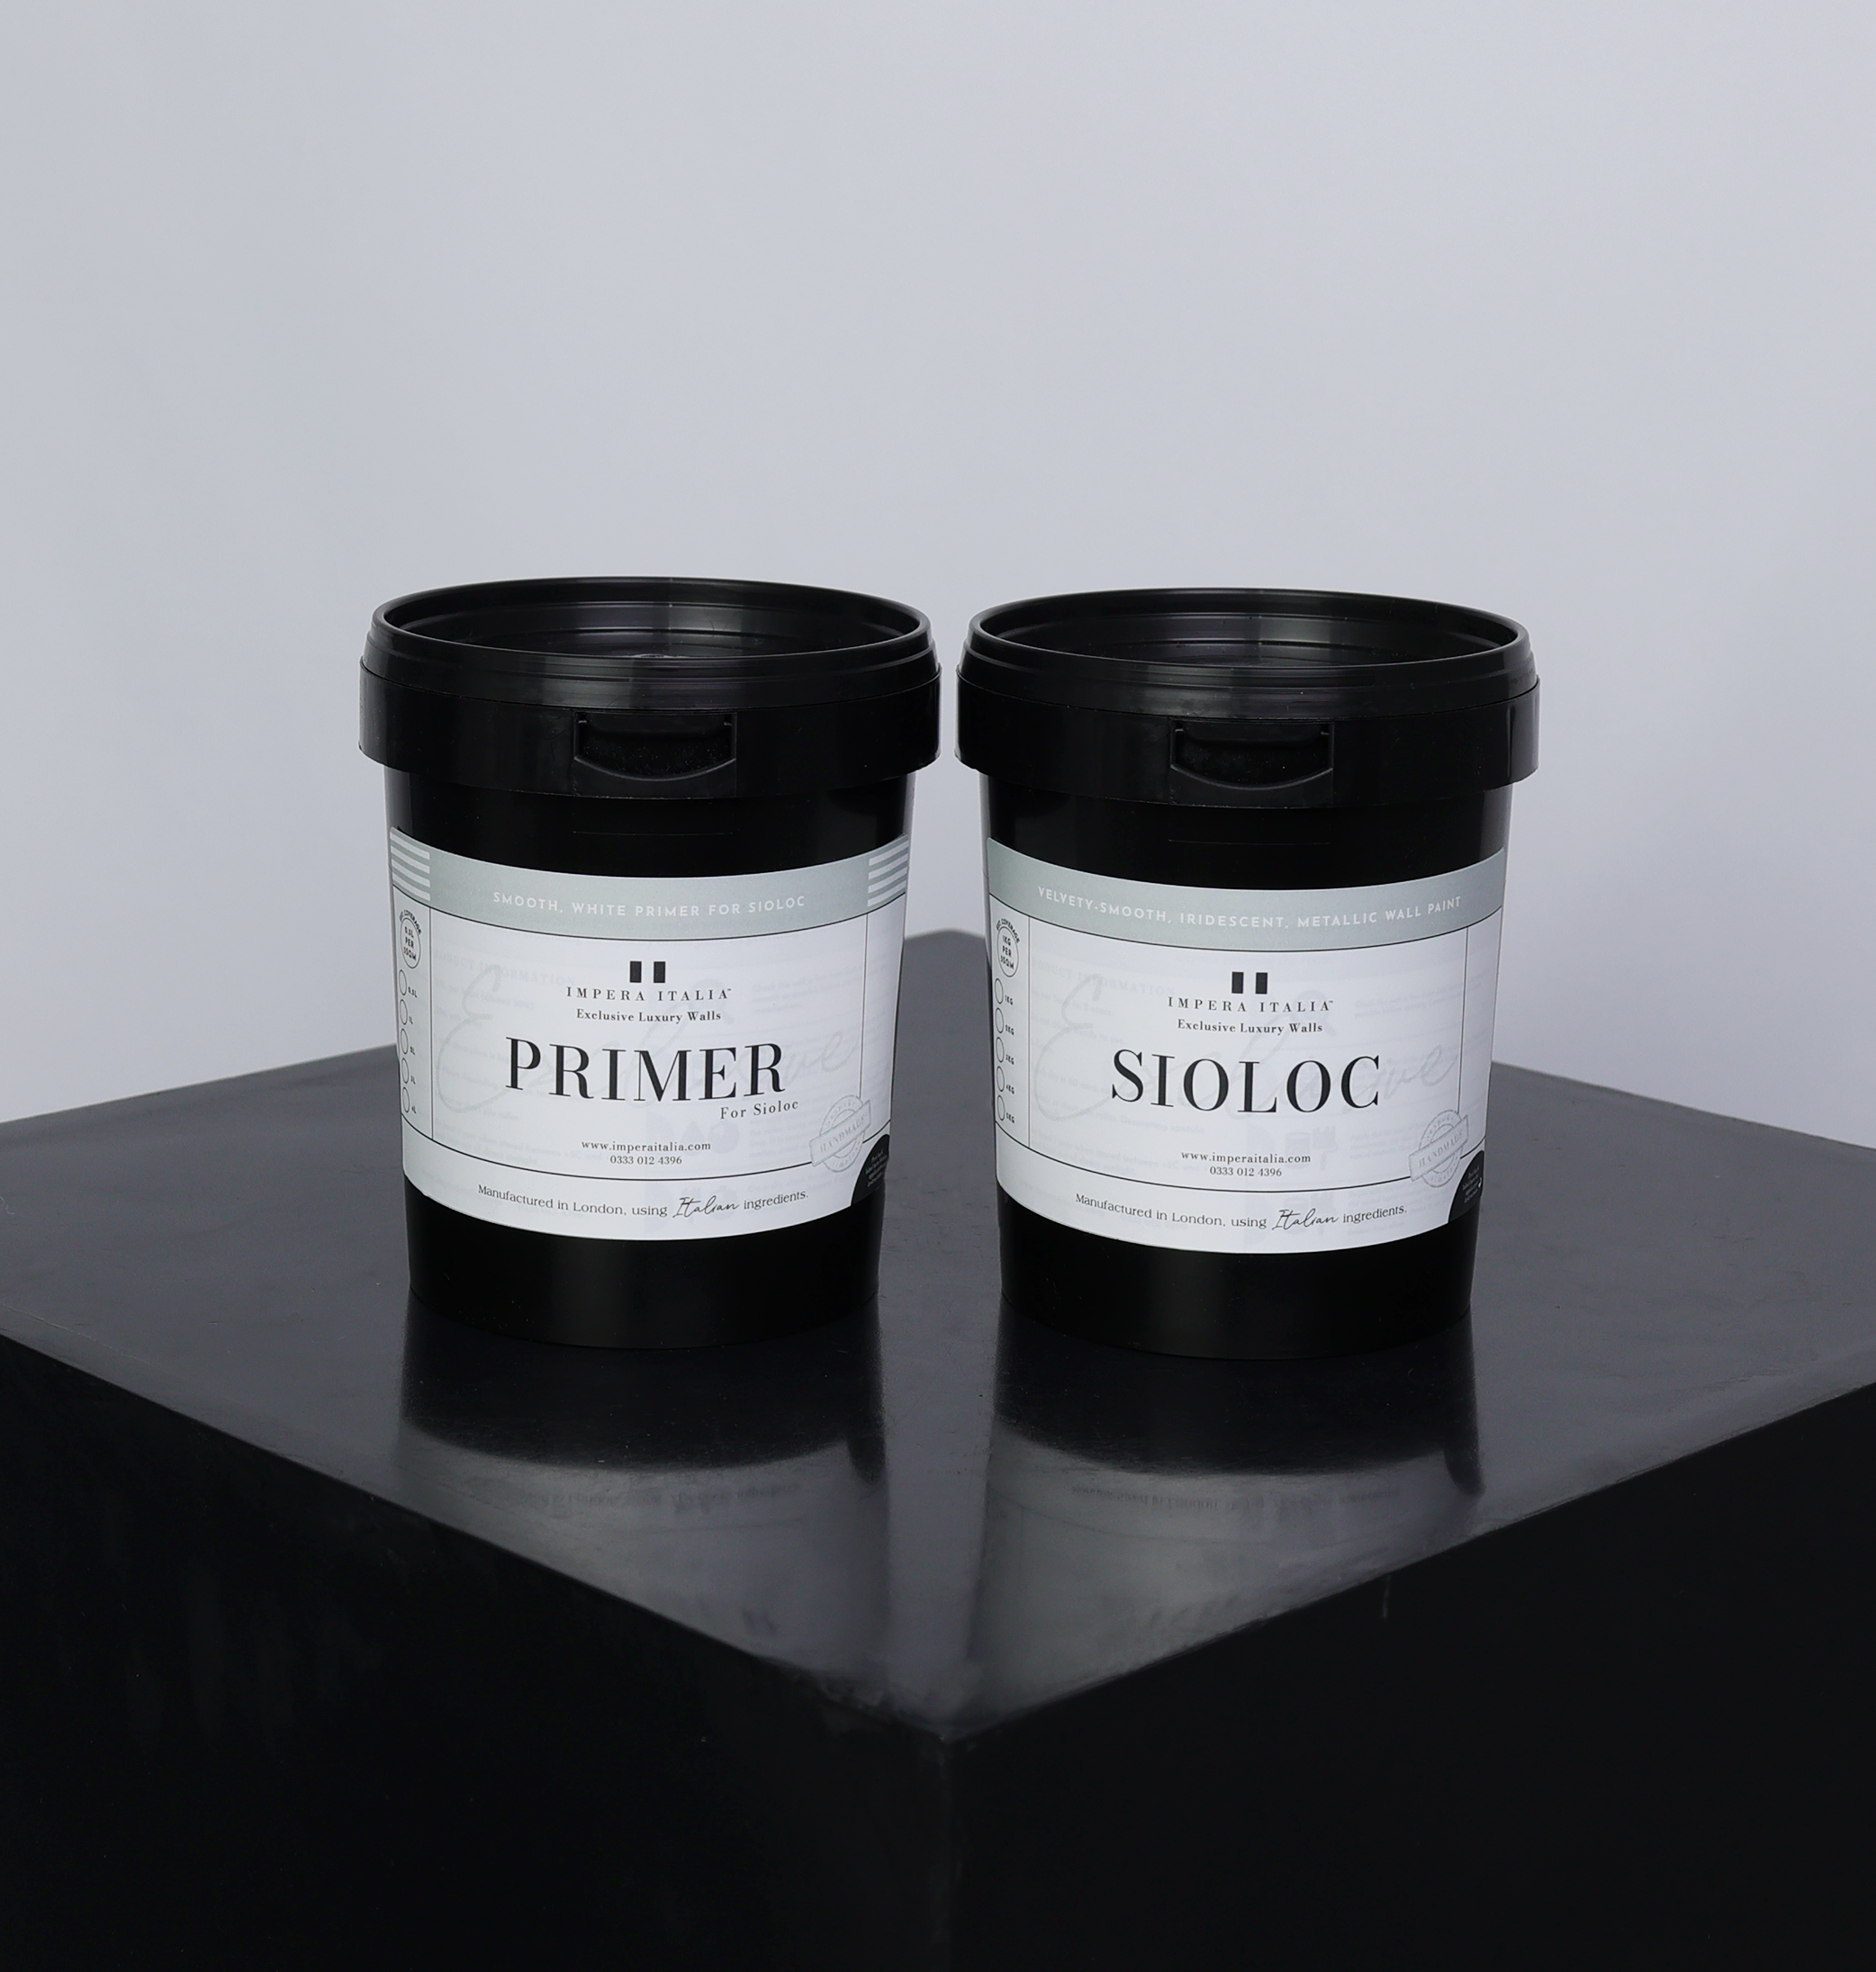 Sioloc Bundle - Smooth Pearly Metallic Paint & Primer Bundle For 5sqm